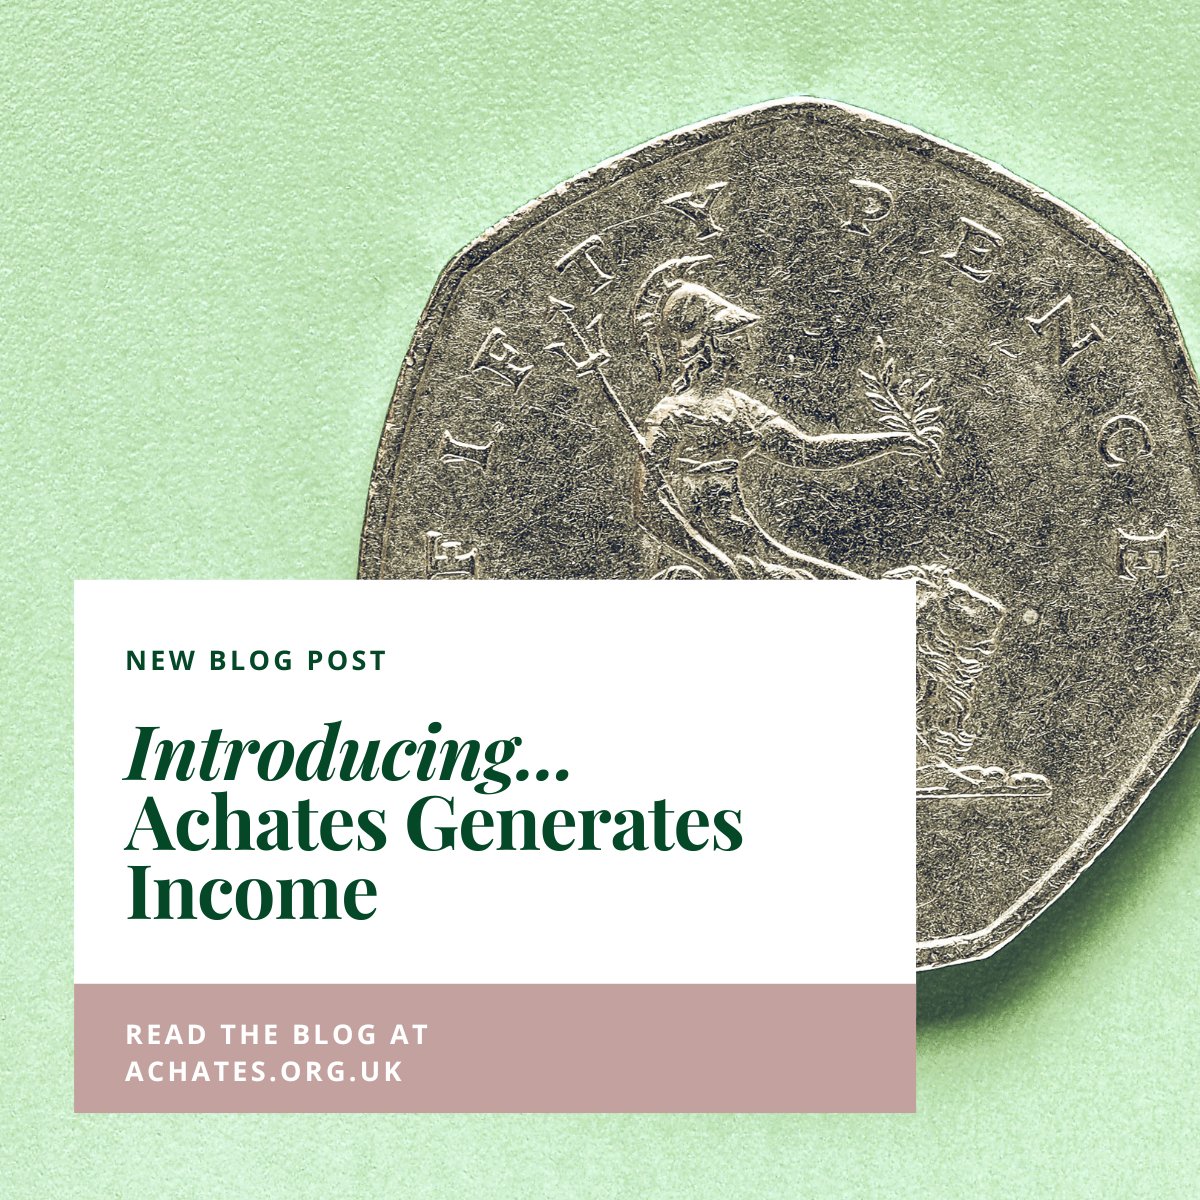 We are delighted to announce that our Achates Fundraises division has now evolved to become Achates Generates Income! Read the full blog here achates.org.uk/think-pieces/i… #AchatesGeneratesIncome #IncomeGeneration #Change #CultureShift